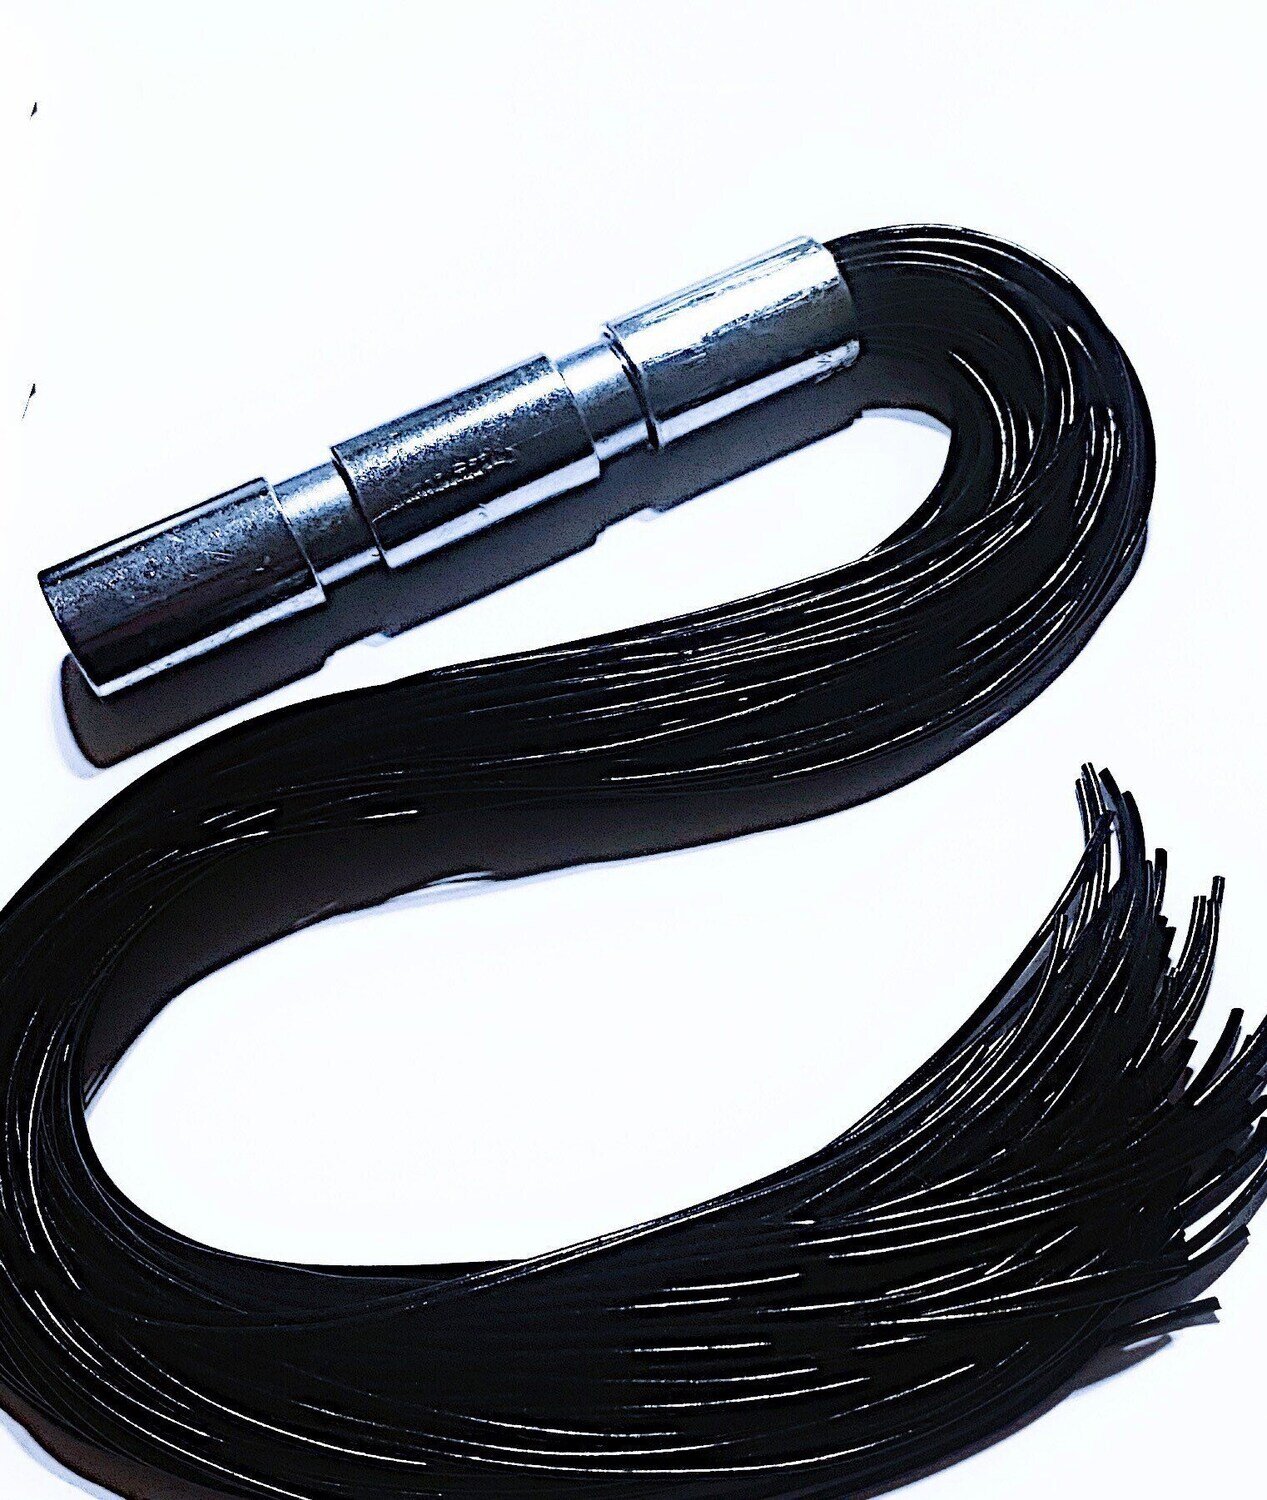 BDSM Flogger Black rubber falls chrome plated metal handle Impact Play  Gear Spanking Flogger